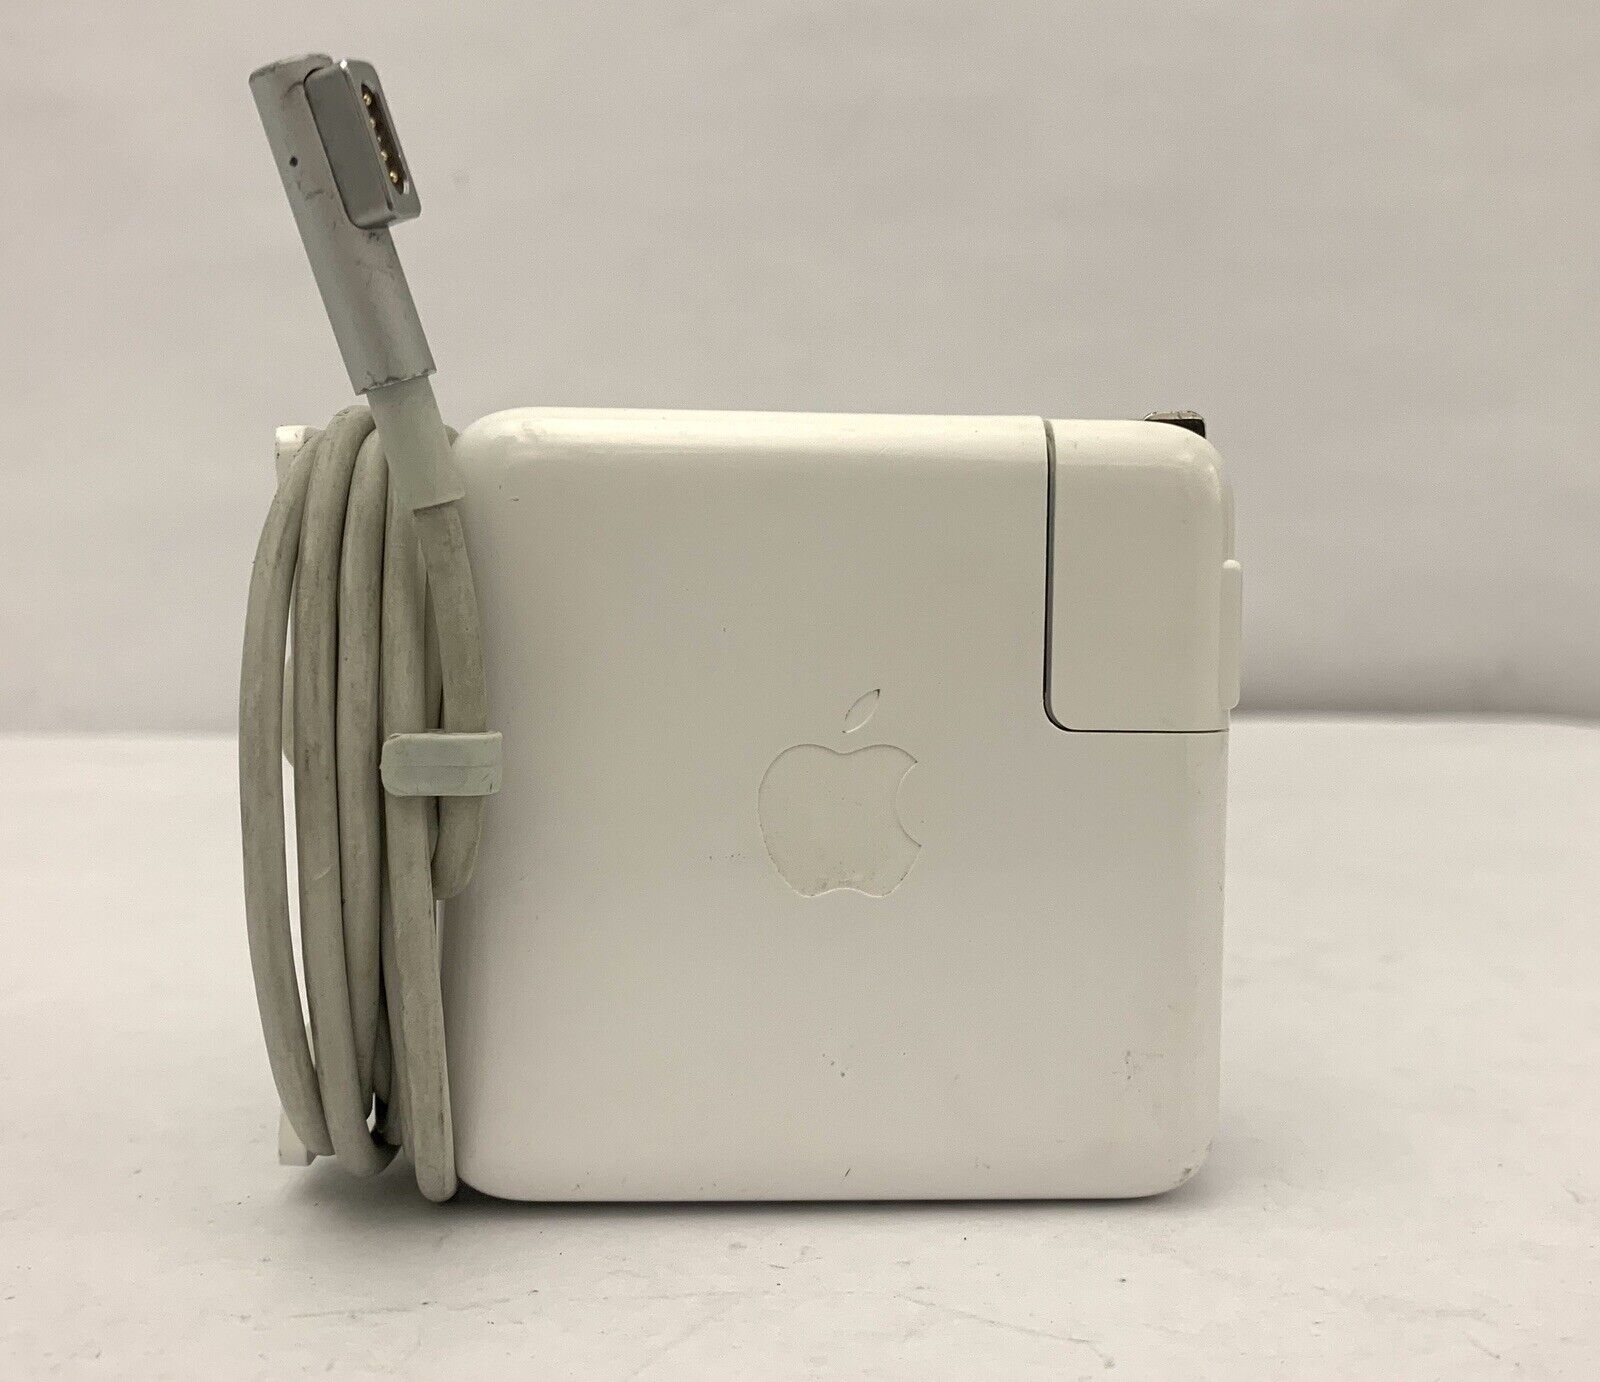 Original OEM Apple 60W Macbook Pro MagSafe AC Adapter Charger A1344 Tested